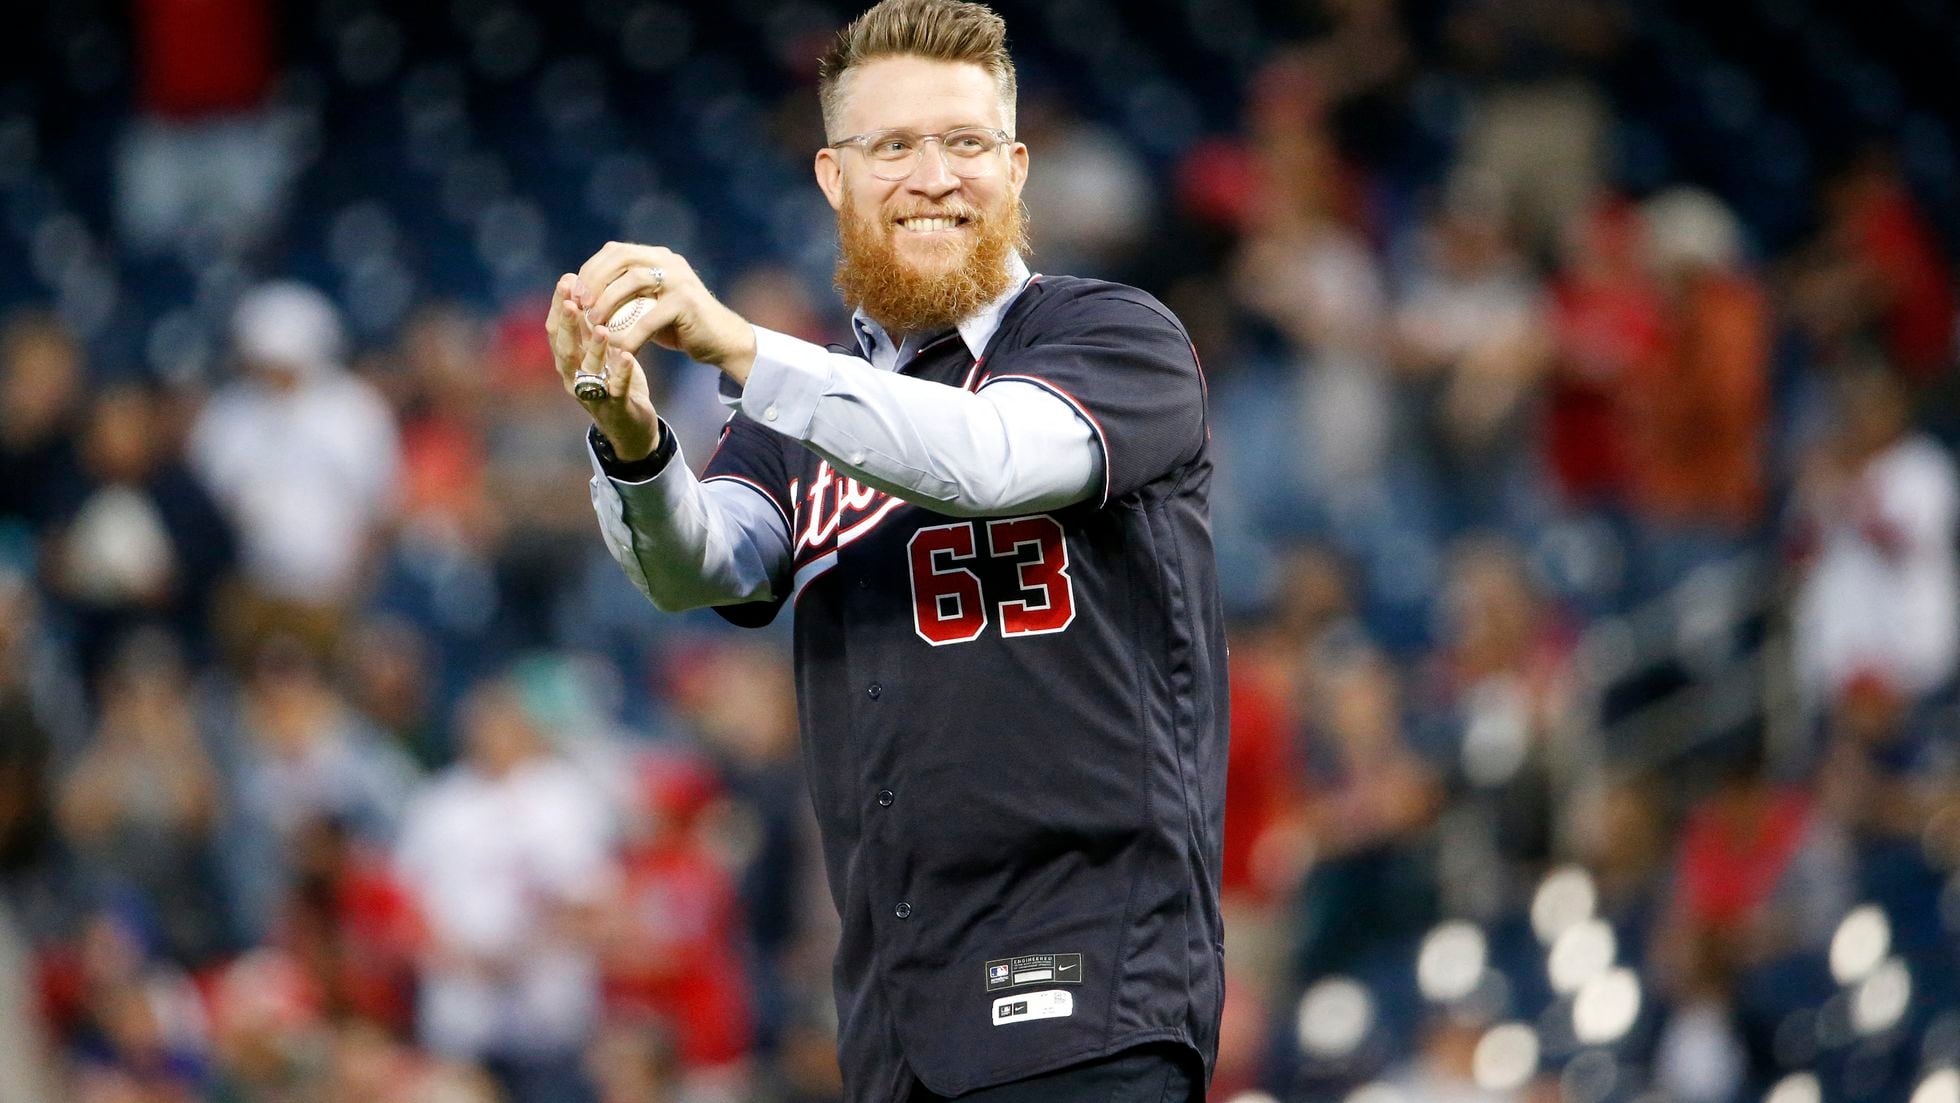 Nationals to wear lucky navy blue jerseys for all of World Series